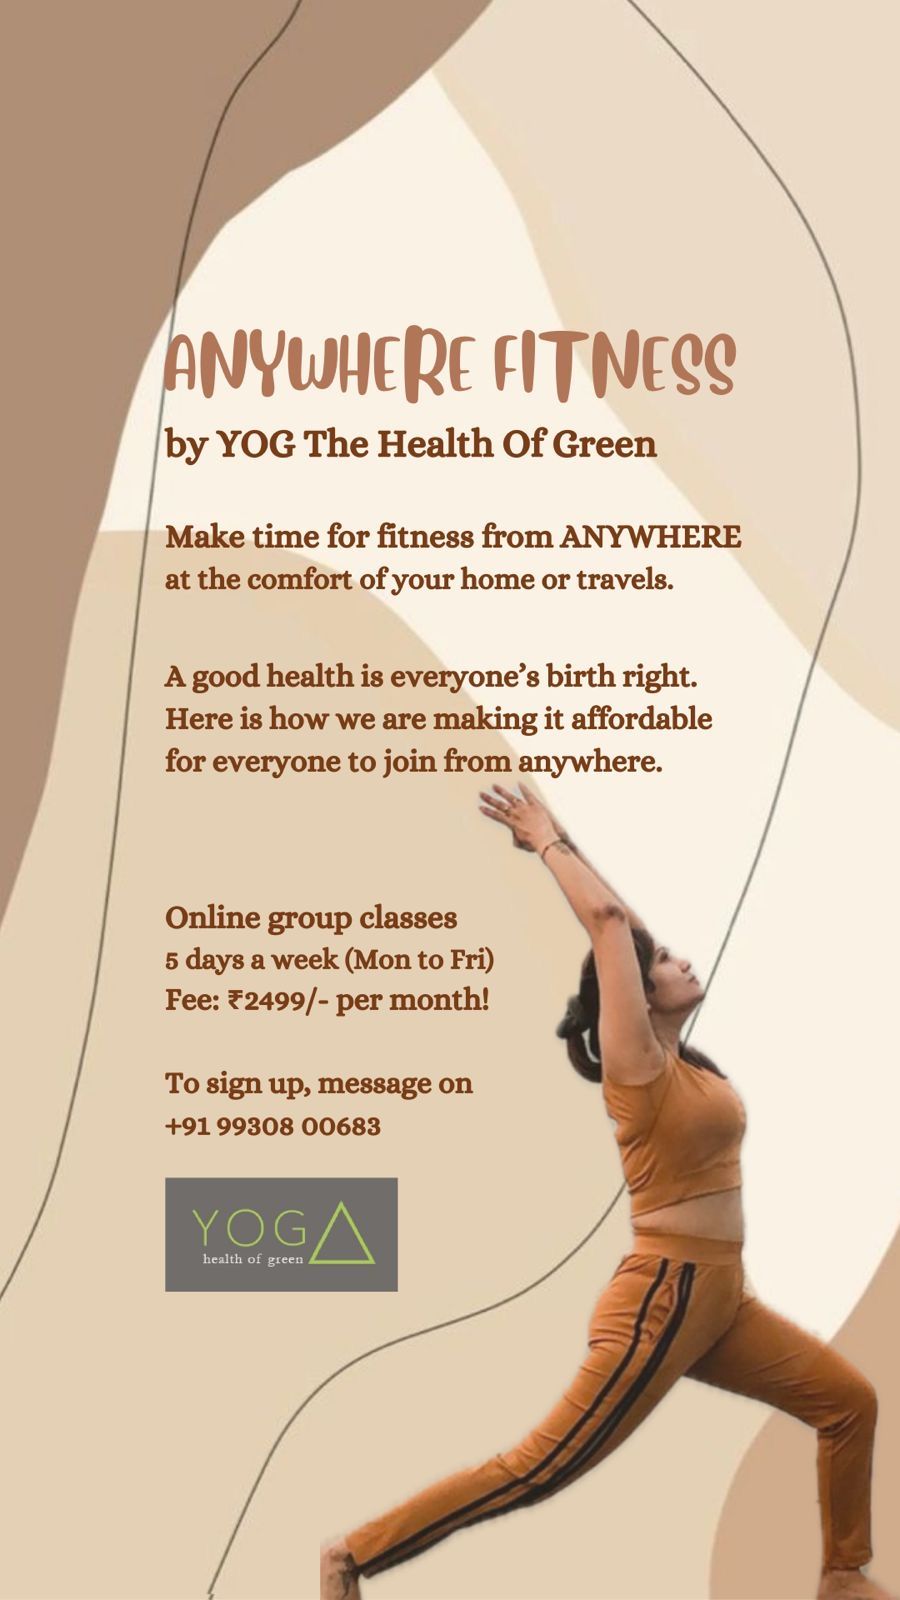 A good health is everyone’s birth right.
Here is how we are making it affordable for everyone to join from anywhere.

*Anywhere Fitness* 

By Mamta Agarwal, Founder, Yog - The Health of Green 

 *An online fitness program* 

*Designed for*
- consistency  
- affordability  
- flexibility  

So you can make time for fitness from anywhere, at the comfort of your home or travels.   💻

🧘‍♀️An online group class that offers a combination of *basic power yoga*, *strength training*, *prayanama*, *meditation* and more with monthly *diet tips and plans*.   


🗓️ *5 days a week* (Monday to Friday)   

🕓 *4.00 - 4.50pm*  

*Only for 2499/- per month.*  

To sign up, Whats app on  *+91 99308 00683* 

Online link to be shared after sign up 

Follow Mamta Agarwal on Instagram at https://instagram.com/mamta.agrawal.94  

Read reviews on google 
https://g.co/kgs/MNQWyr